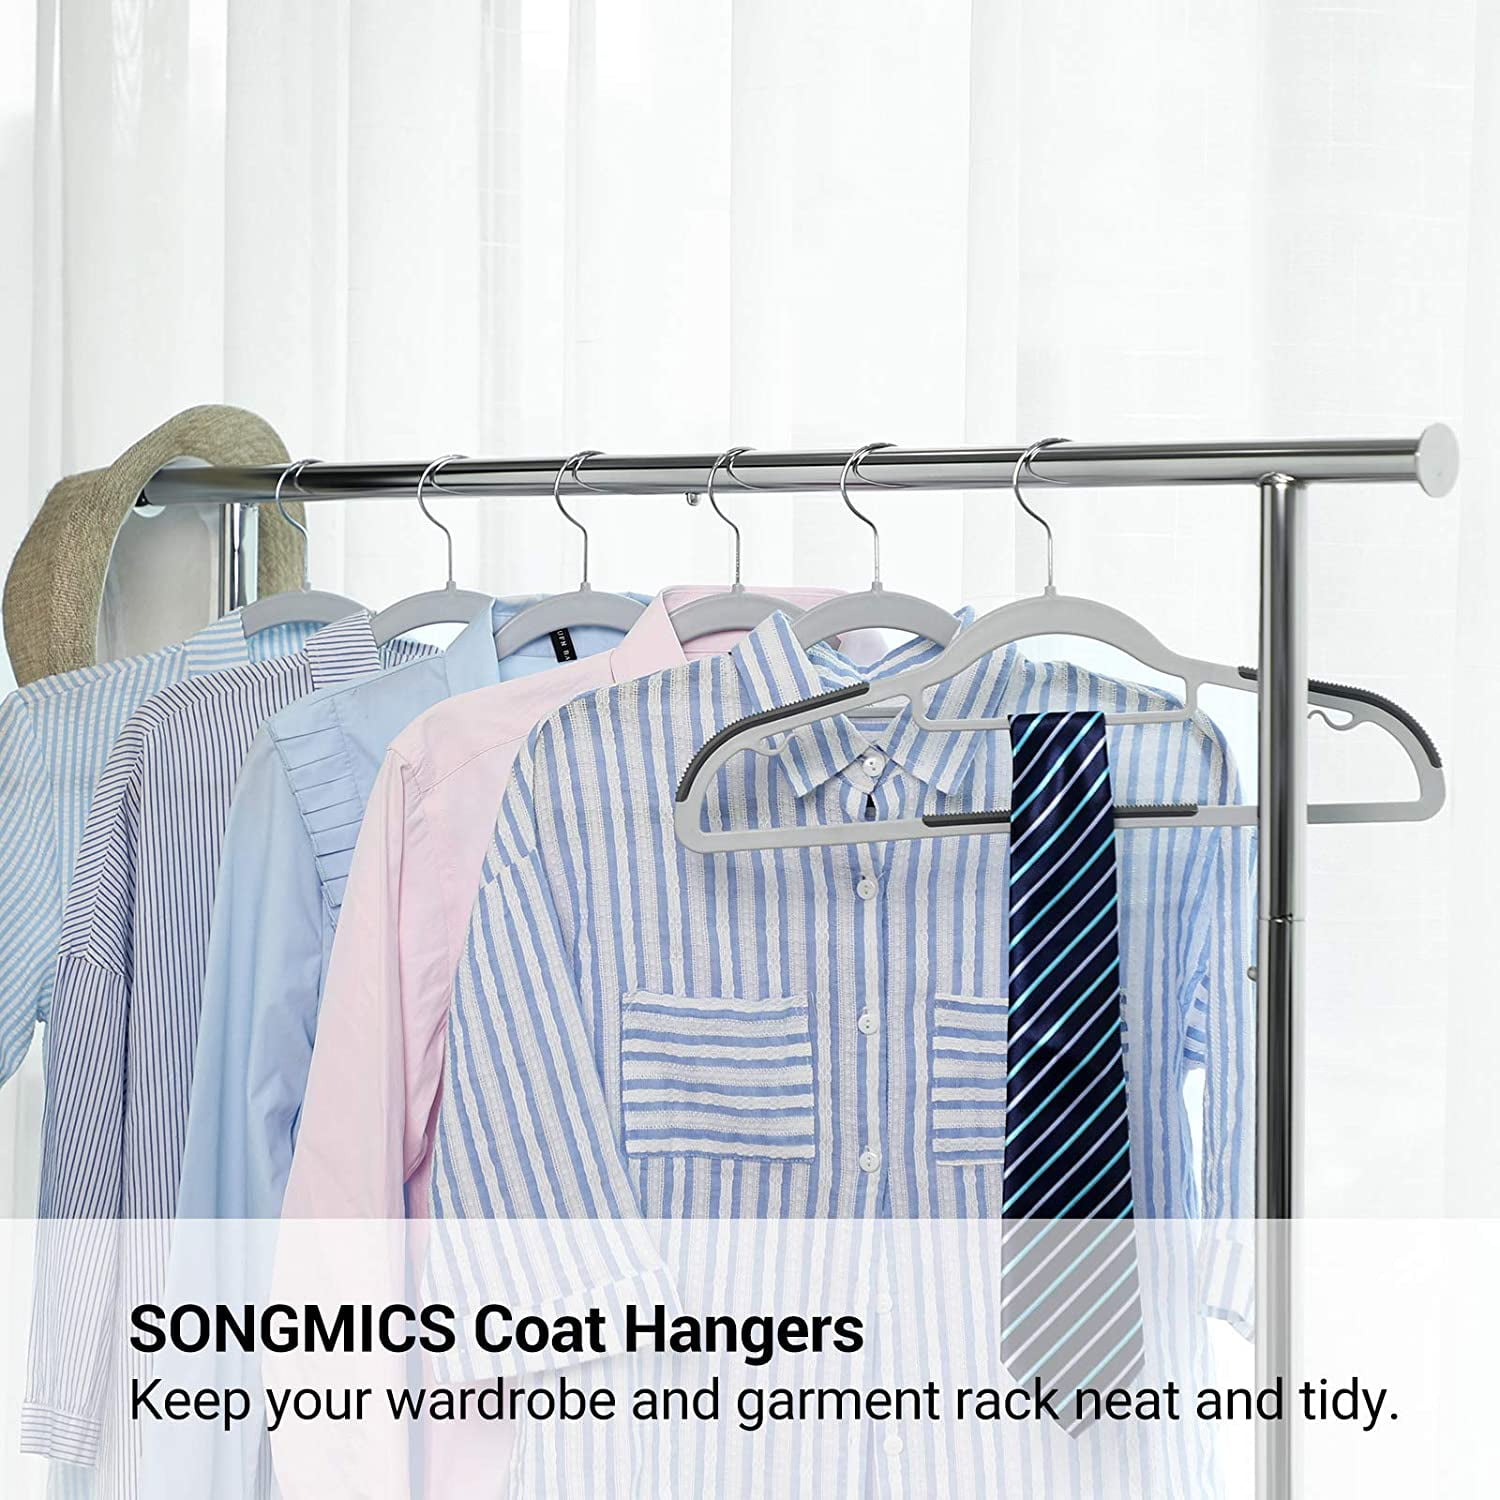  SONGMICS 50 Pack Coat Hangers, Heavy-Duty Plastic Suit Hangers,  S-Shaped Opening, Non-Slip, Space-Saving, 360º Swivel Hook, 16.3 Inches  Long, Light Gray and Dark Gray UCRP41G-50 : Home & Kitchen